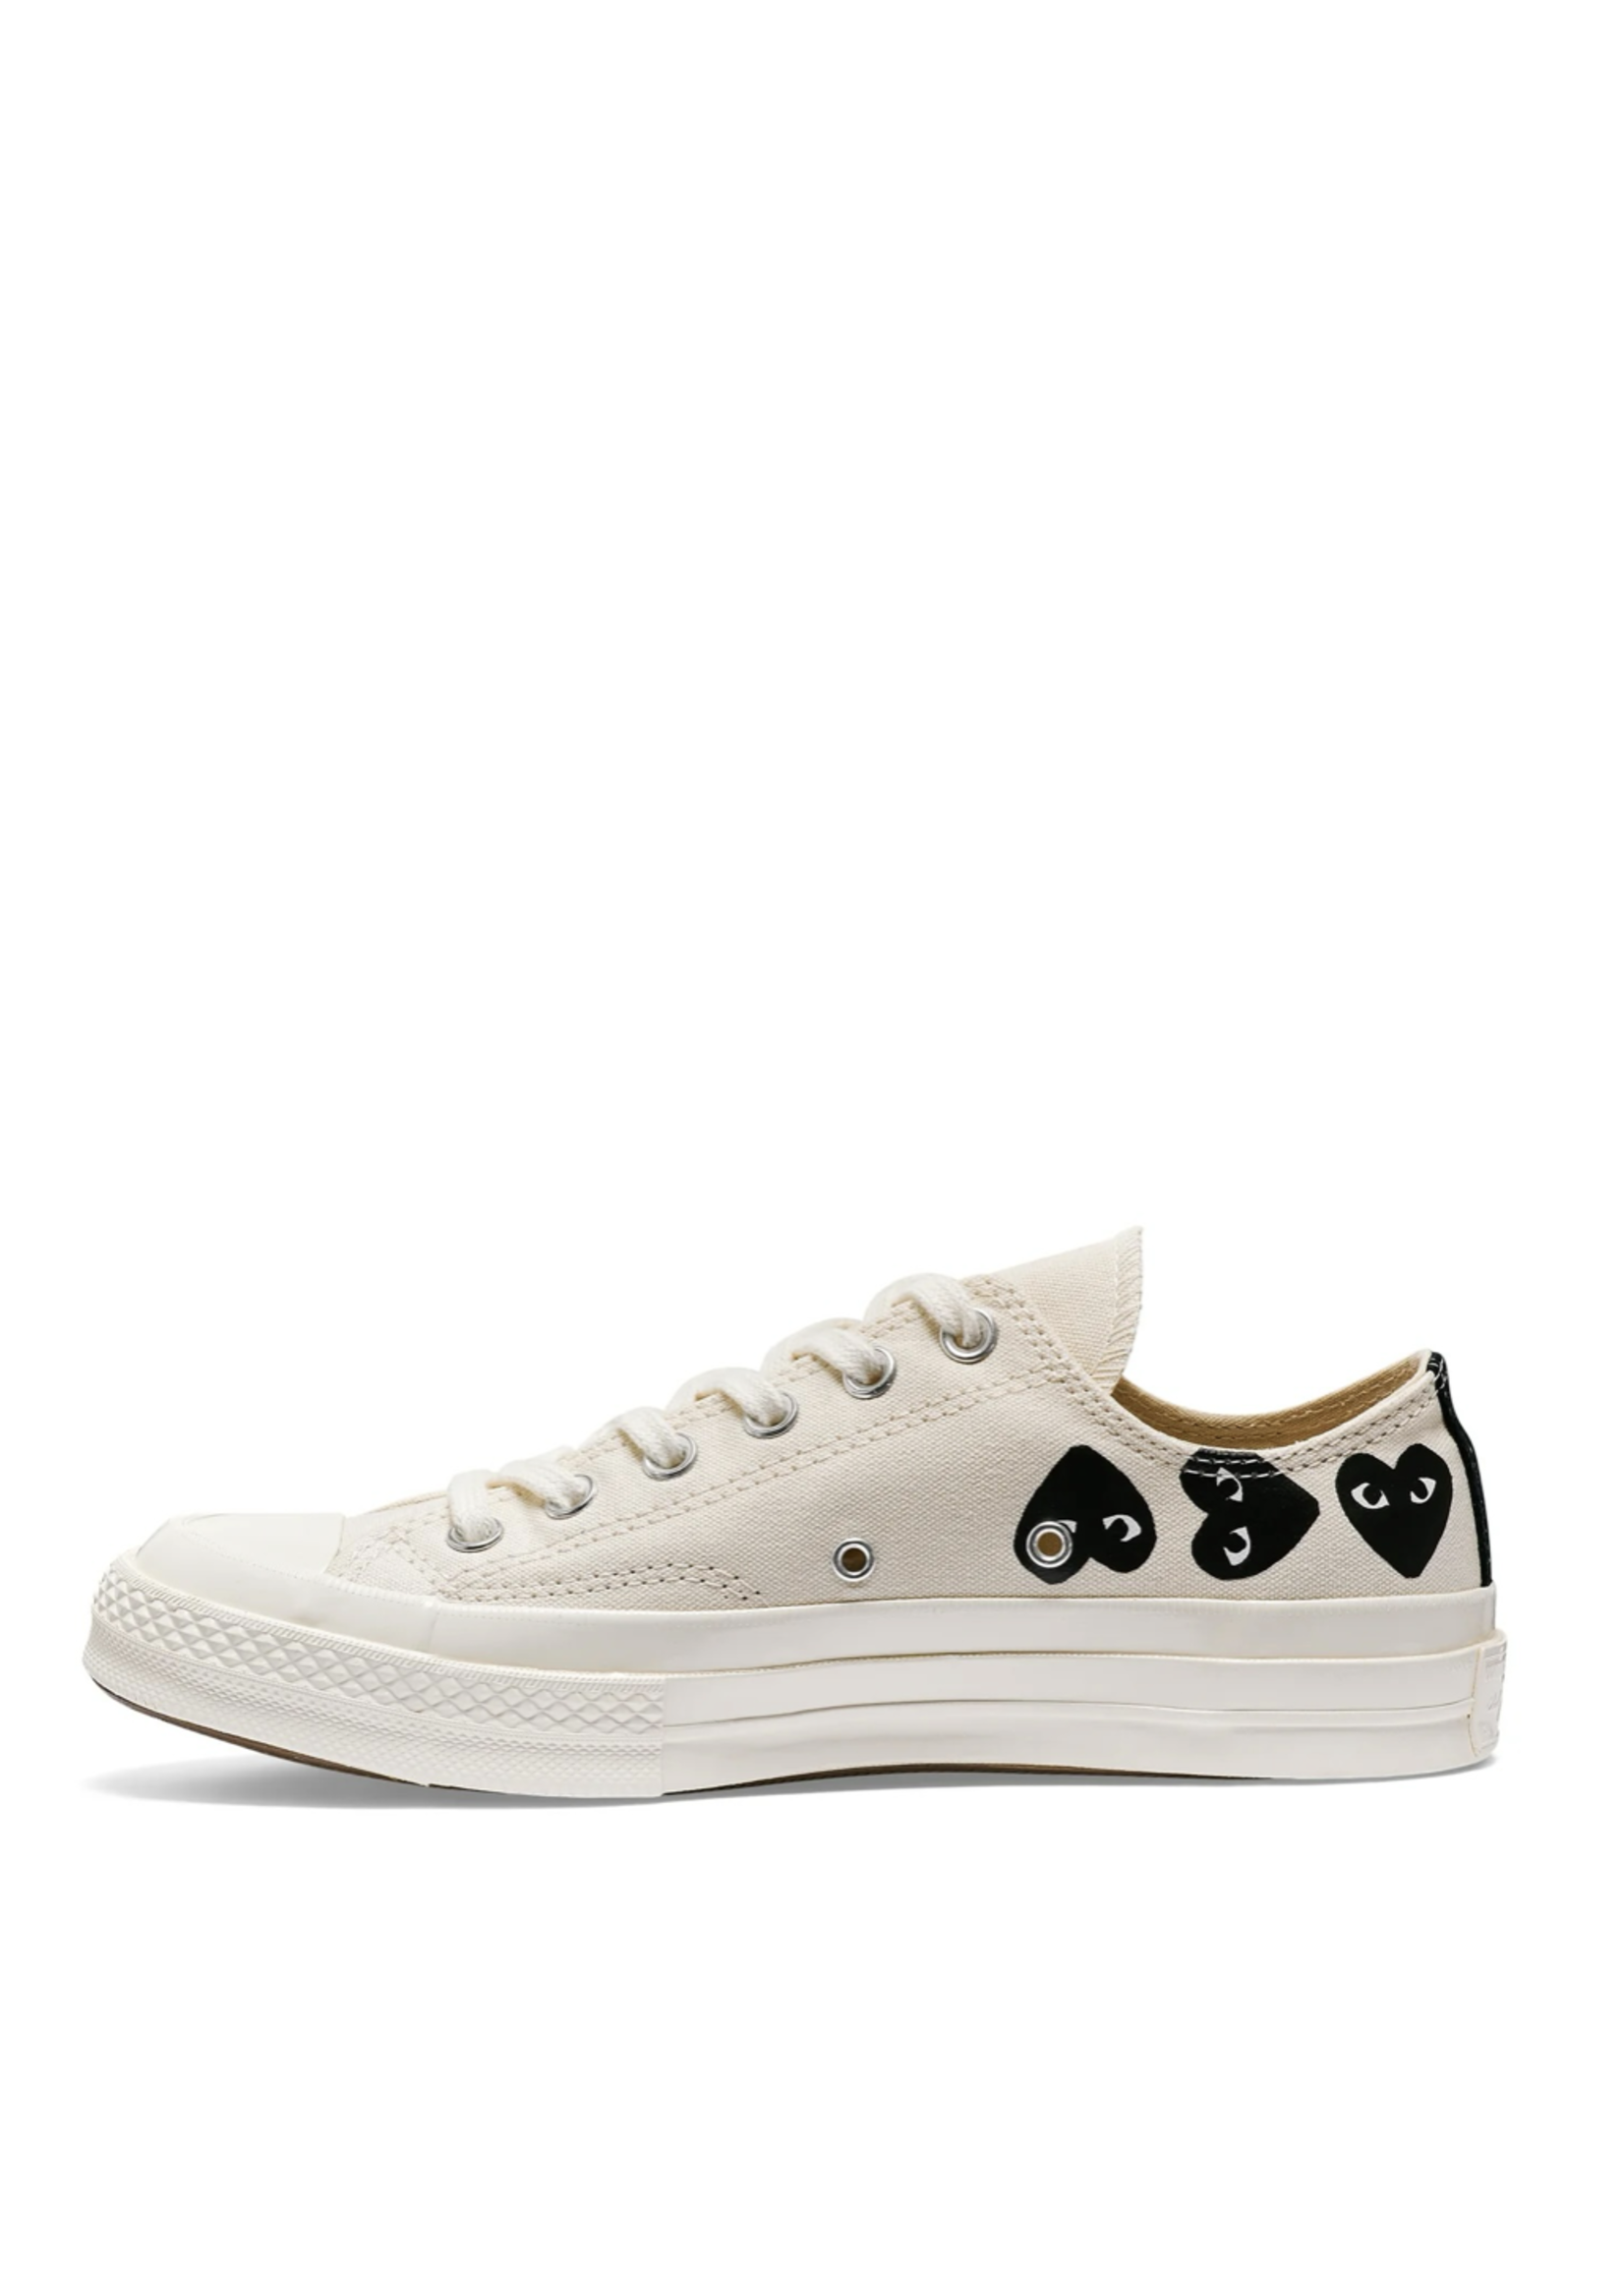 COMME DES GARÇONS PLAY X CONVERSE Multi Heart Low Tops in White